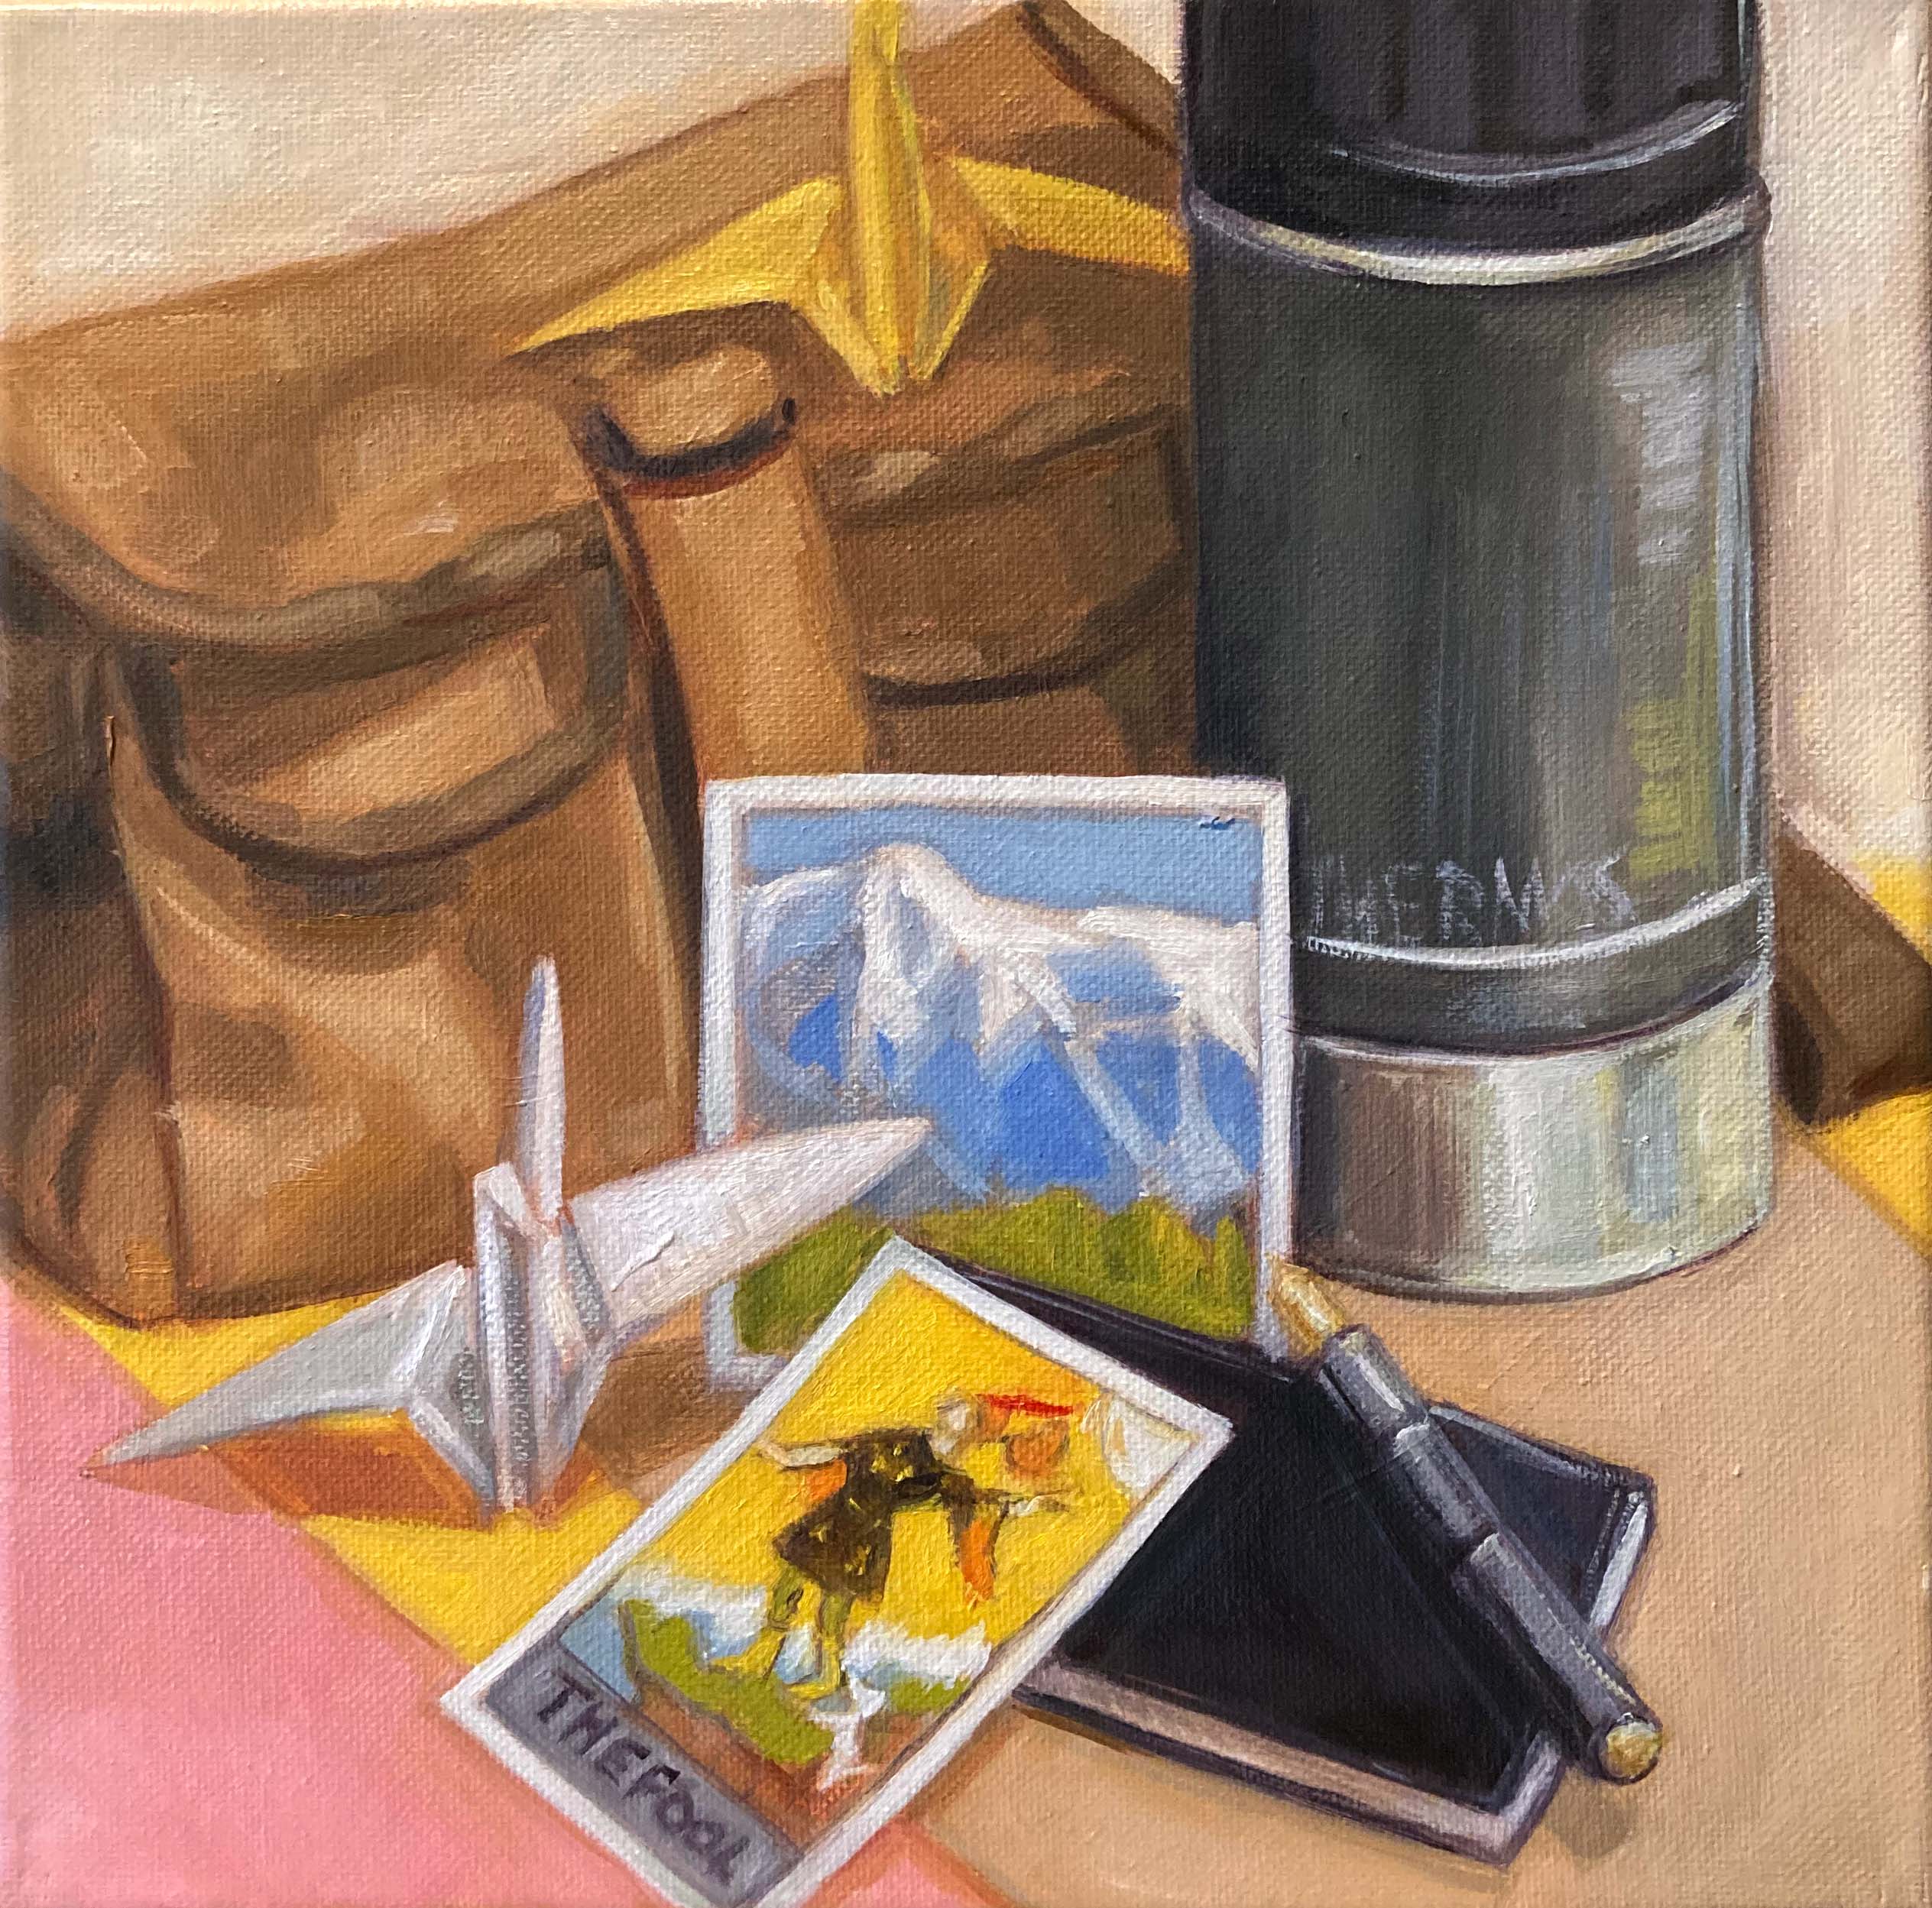 Still life painting of a brown bag, photo of montains, white paper crane, thermos, fountain pen, note book and The Fool tarot card.